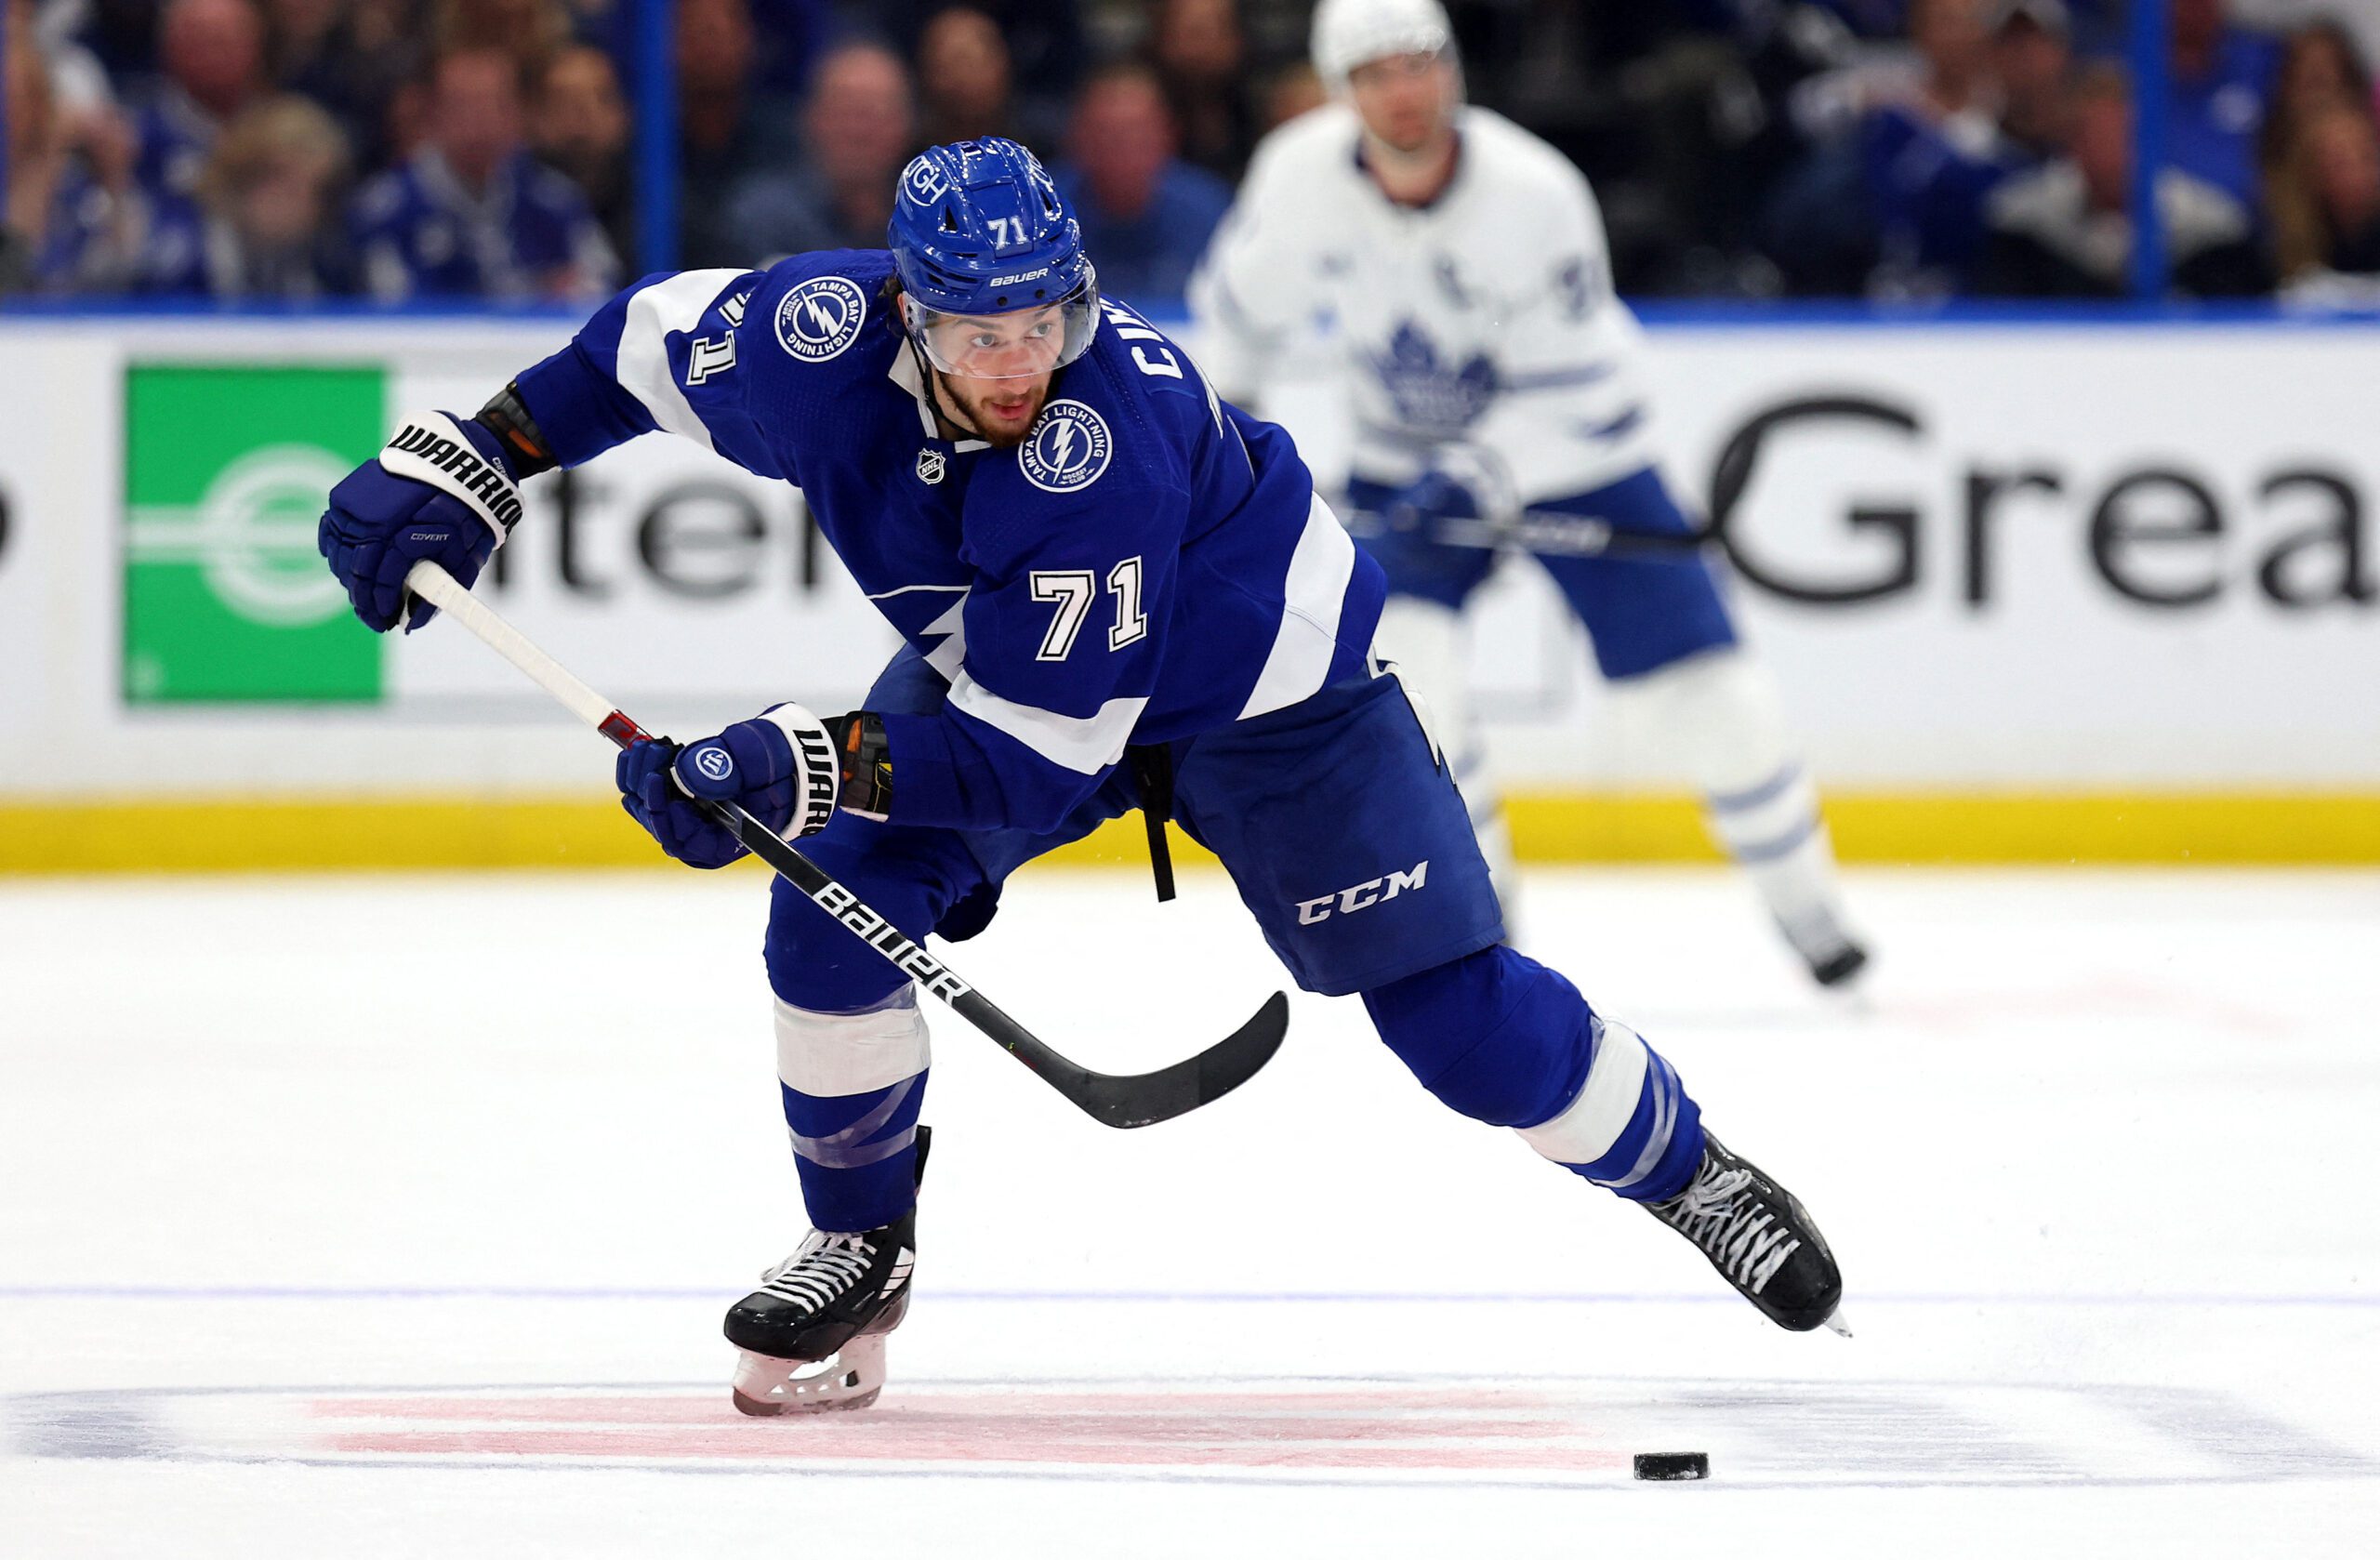 Bet Lightning to Rebound Against Visiting Capitals